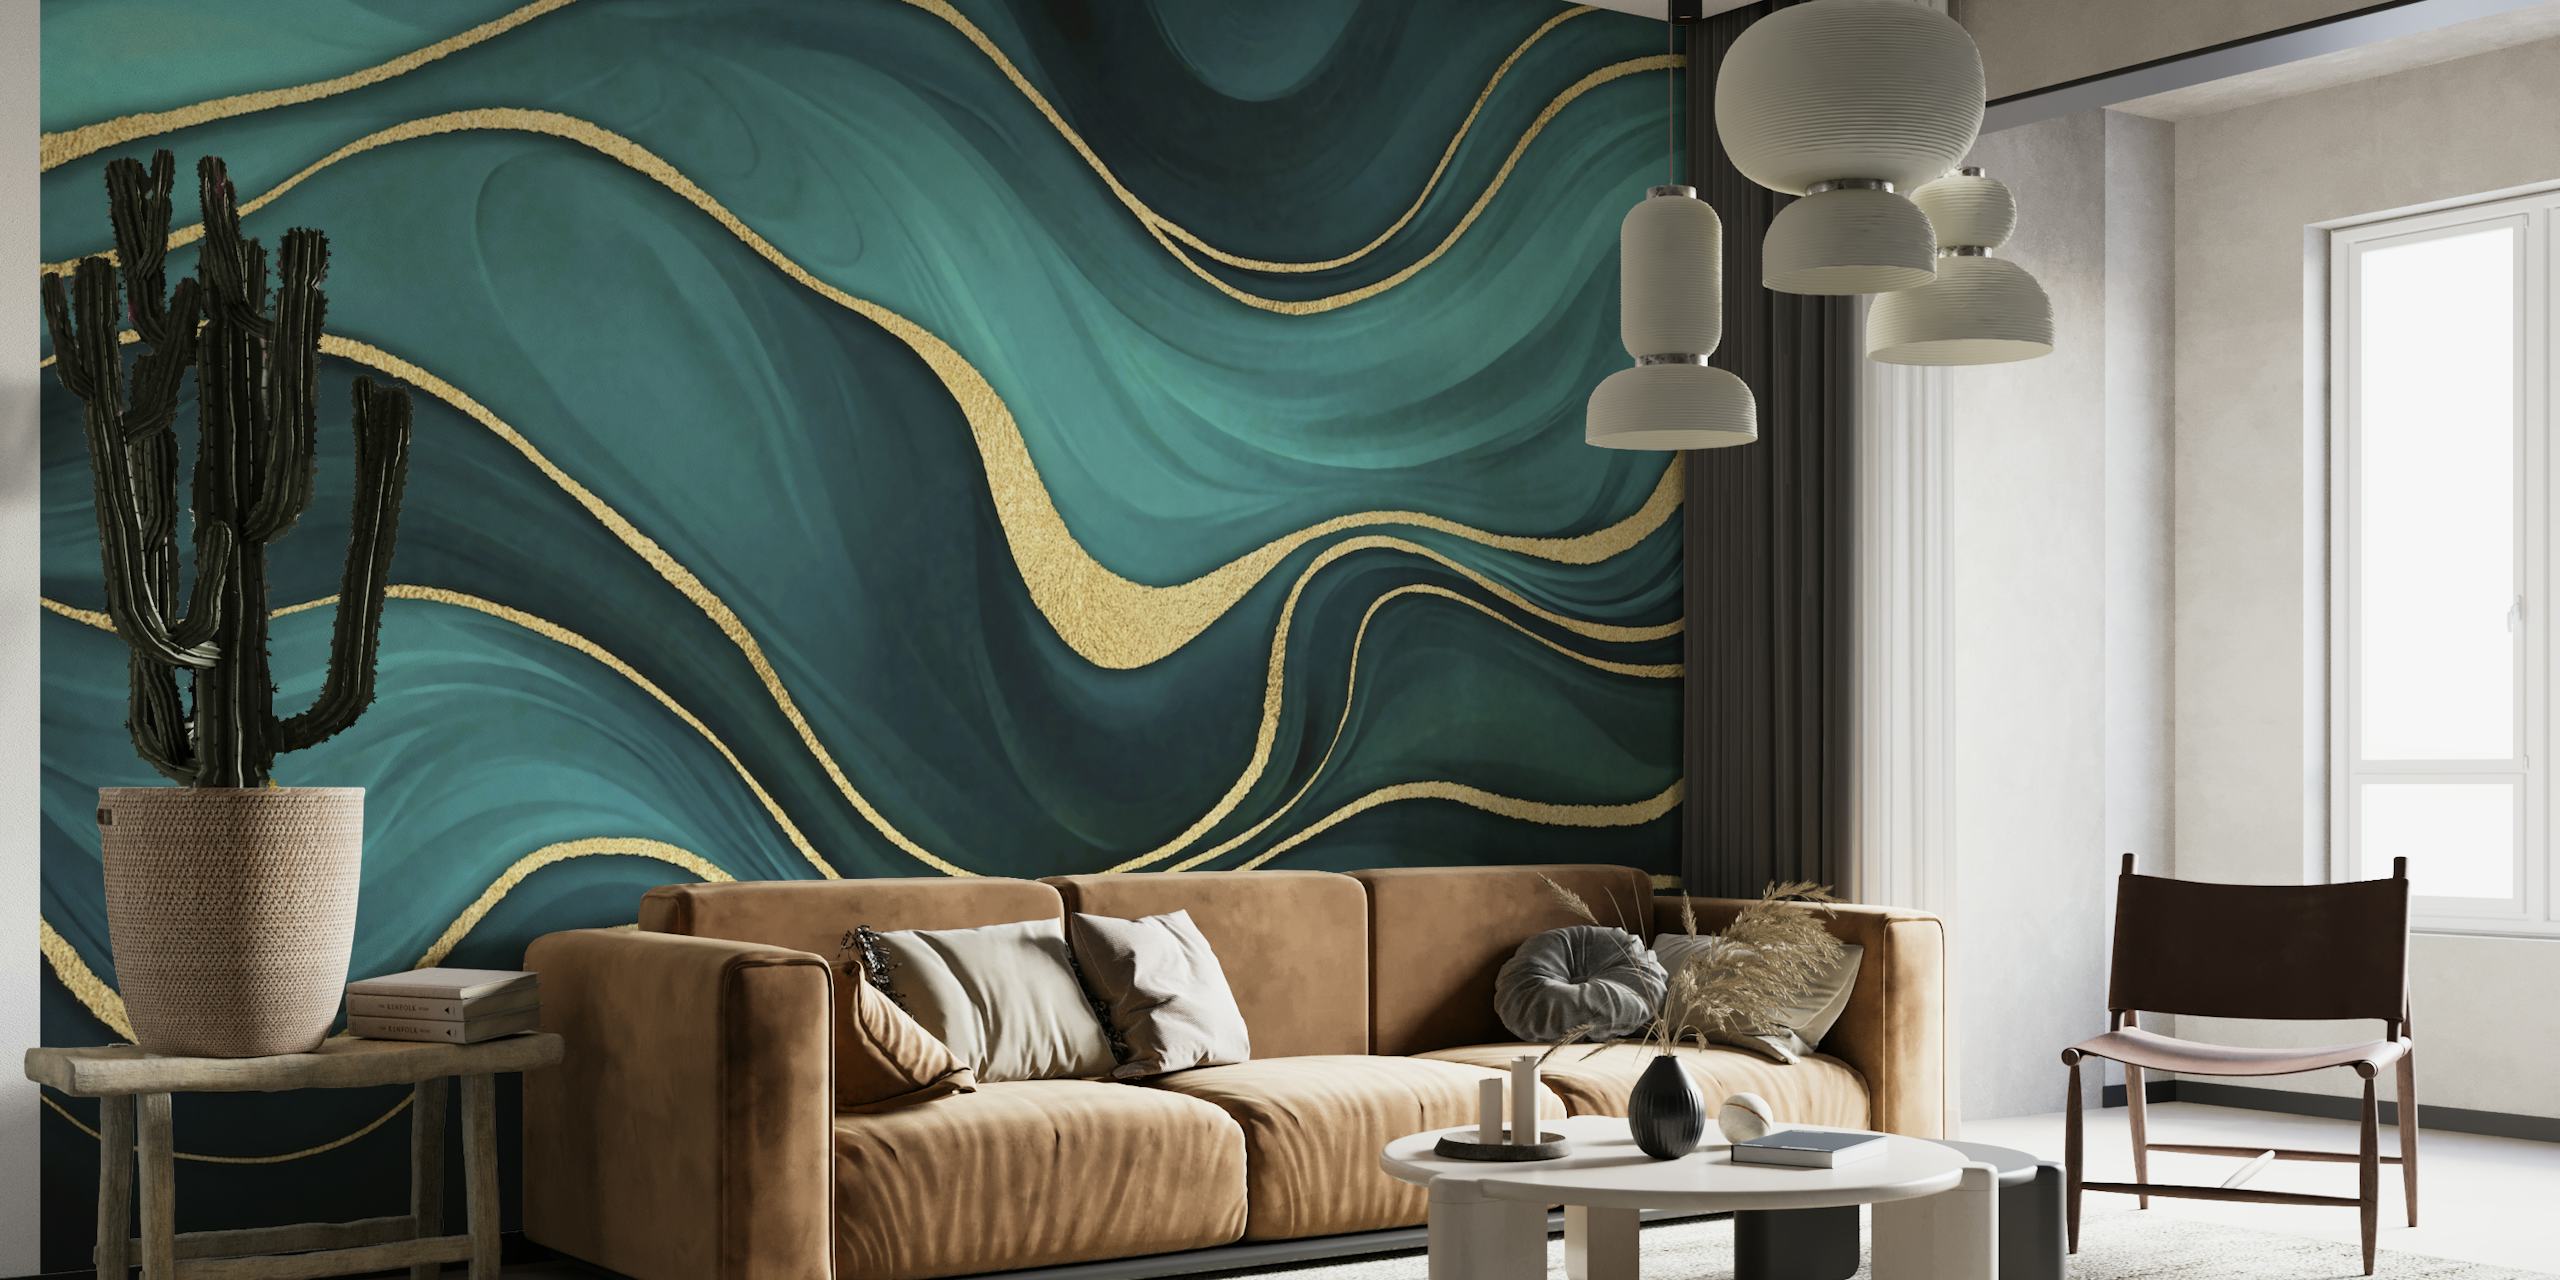 Luxury Marble Teal Turquoise With Gold papel de parede